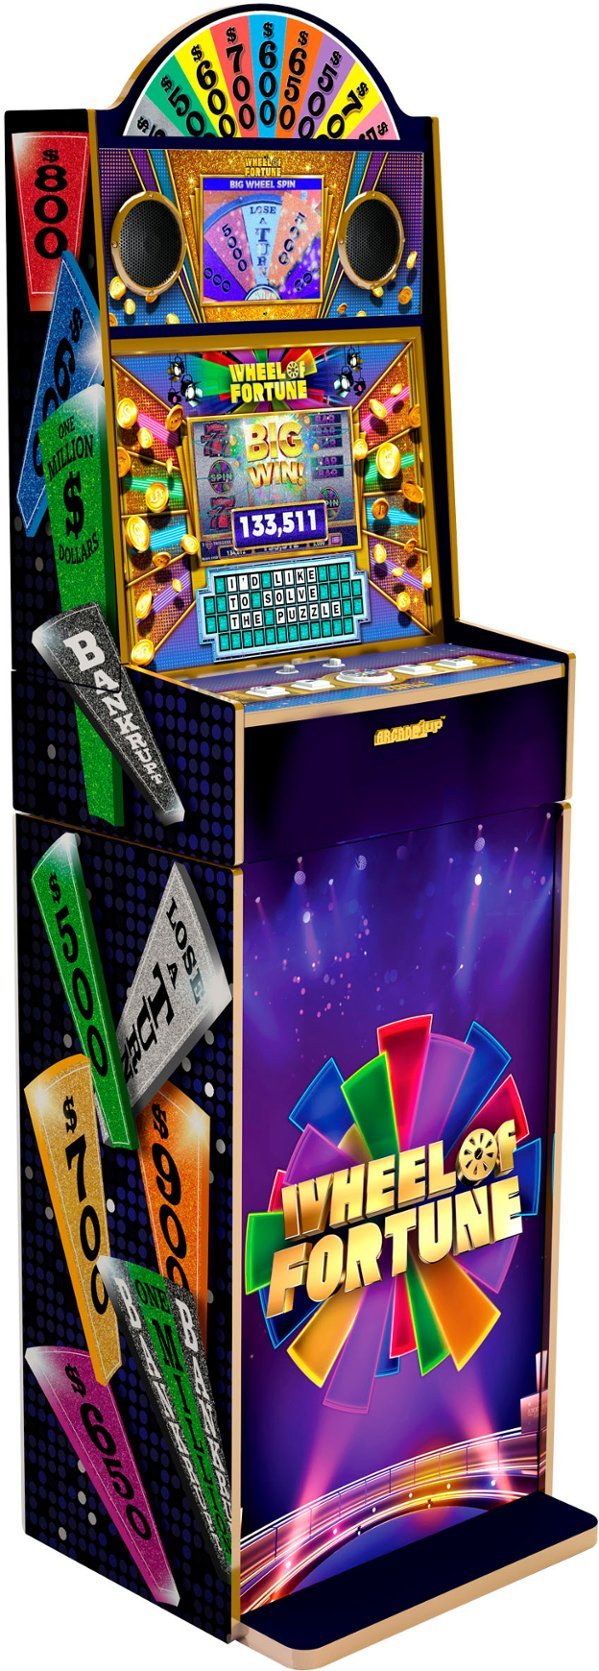 Arcade1Up: Wheel of Fortune Casinocade Deluxe Arcade Game $400 + Free Shipping